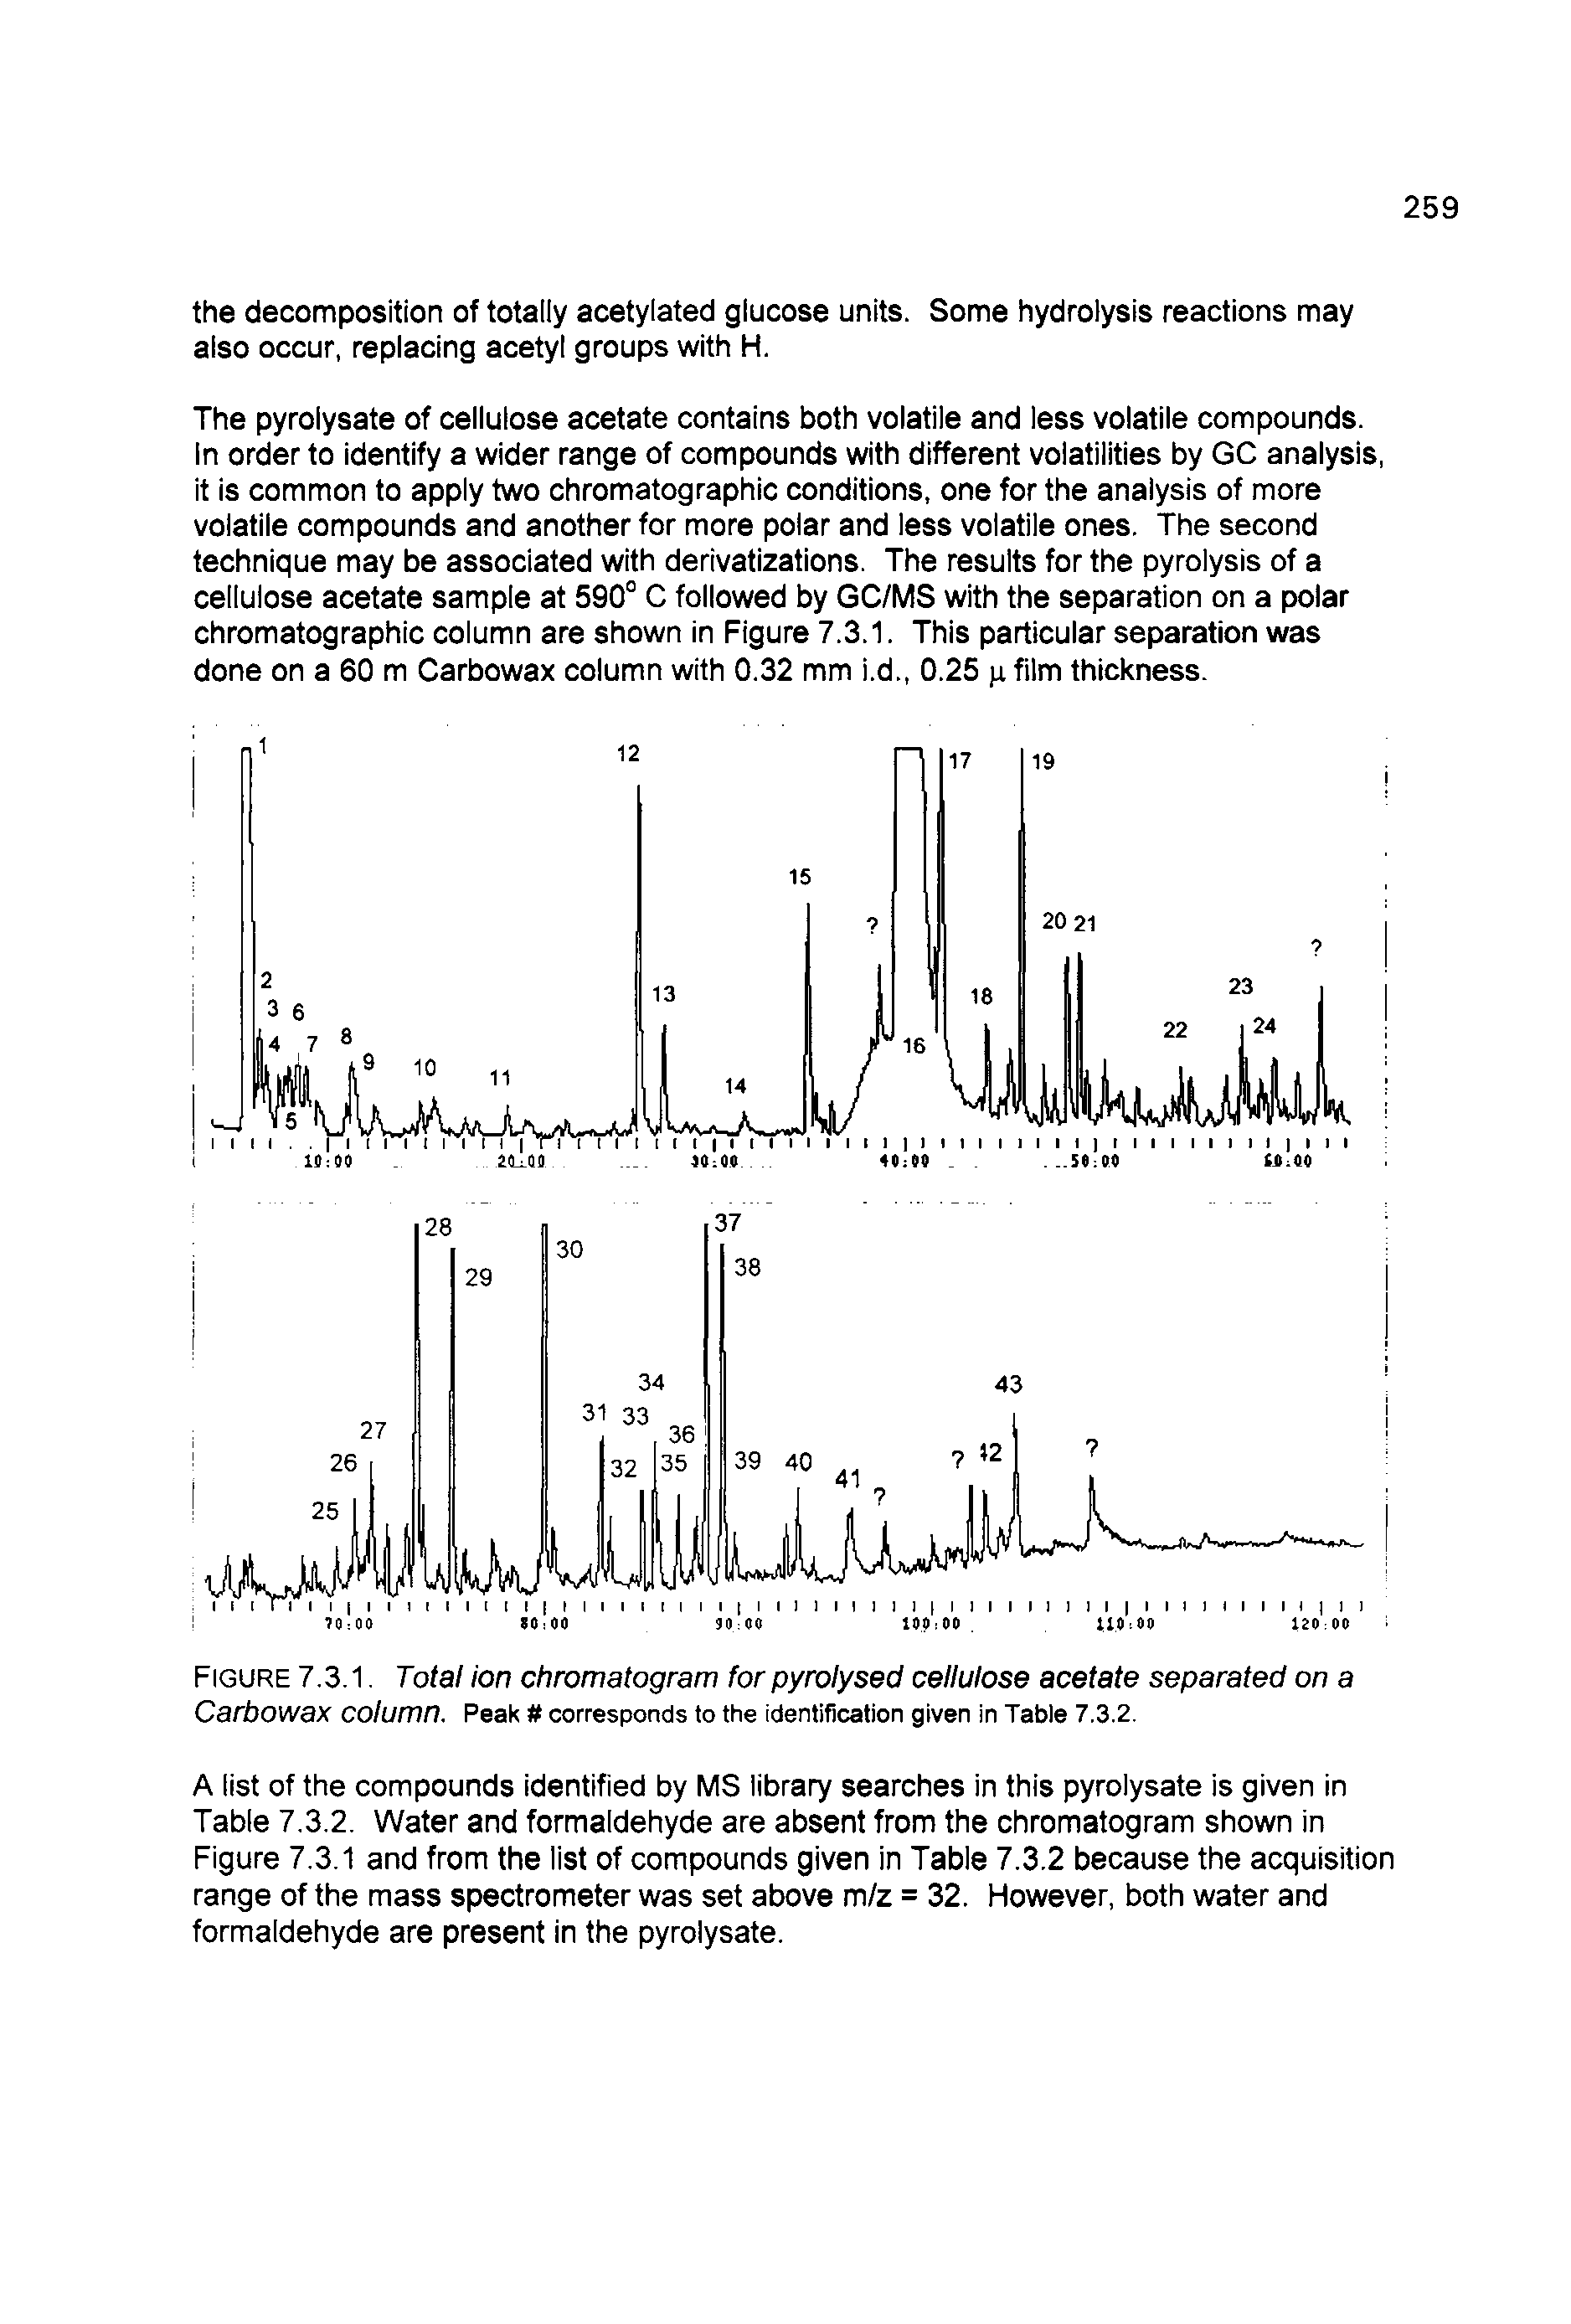 Figure 7.3.1. Total ion chromatogram forpyrolysed cellulose acetate separated on a Carbowax column. Peak corresponds to the identification given in Table 7.3.2.